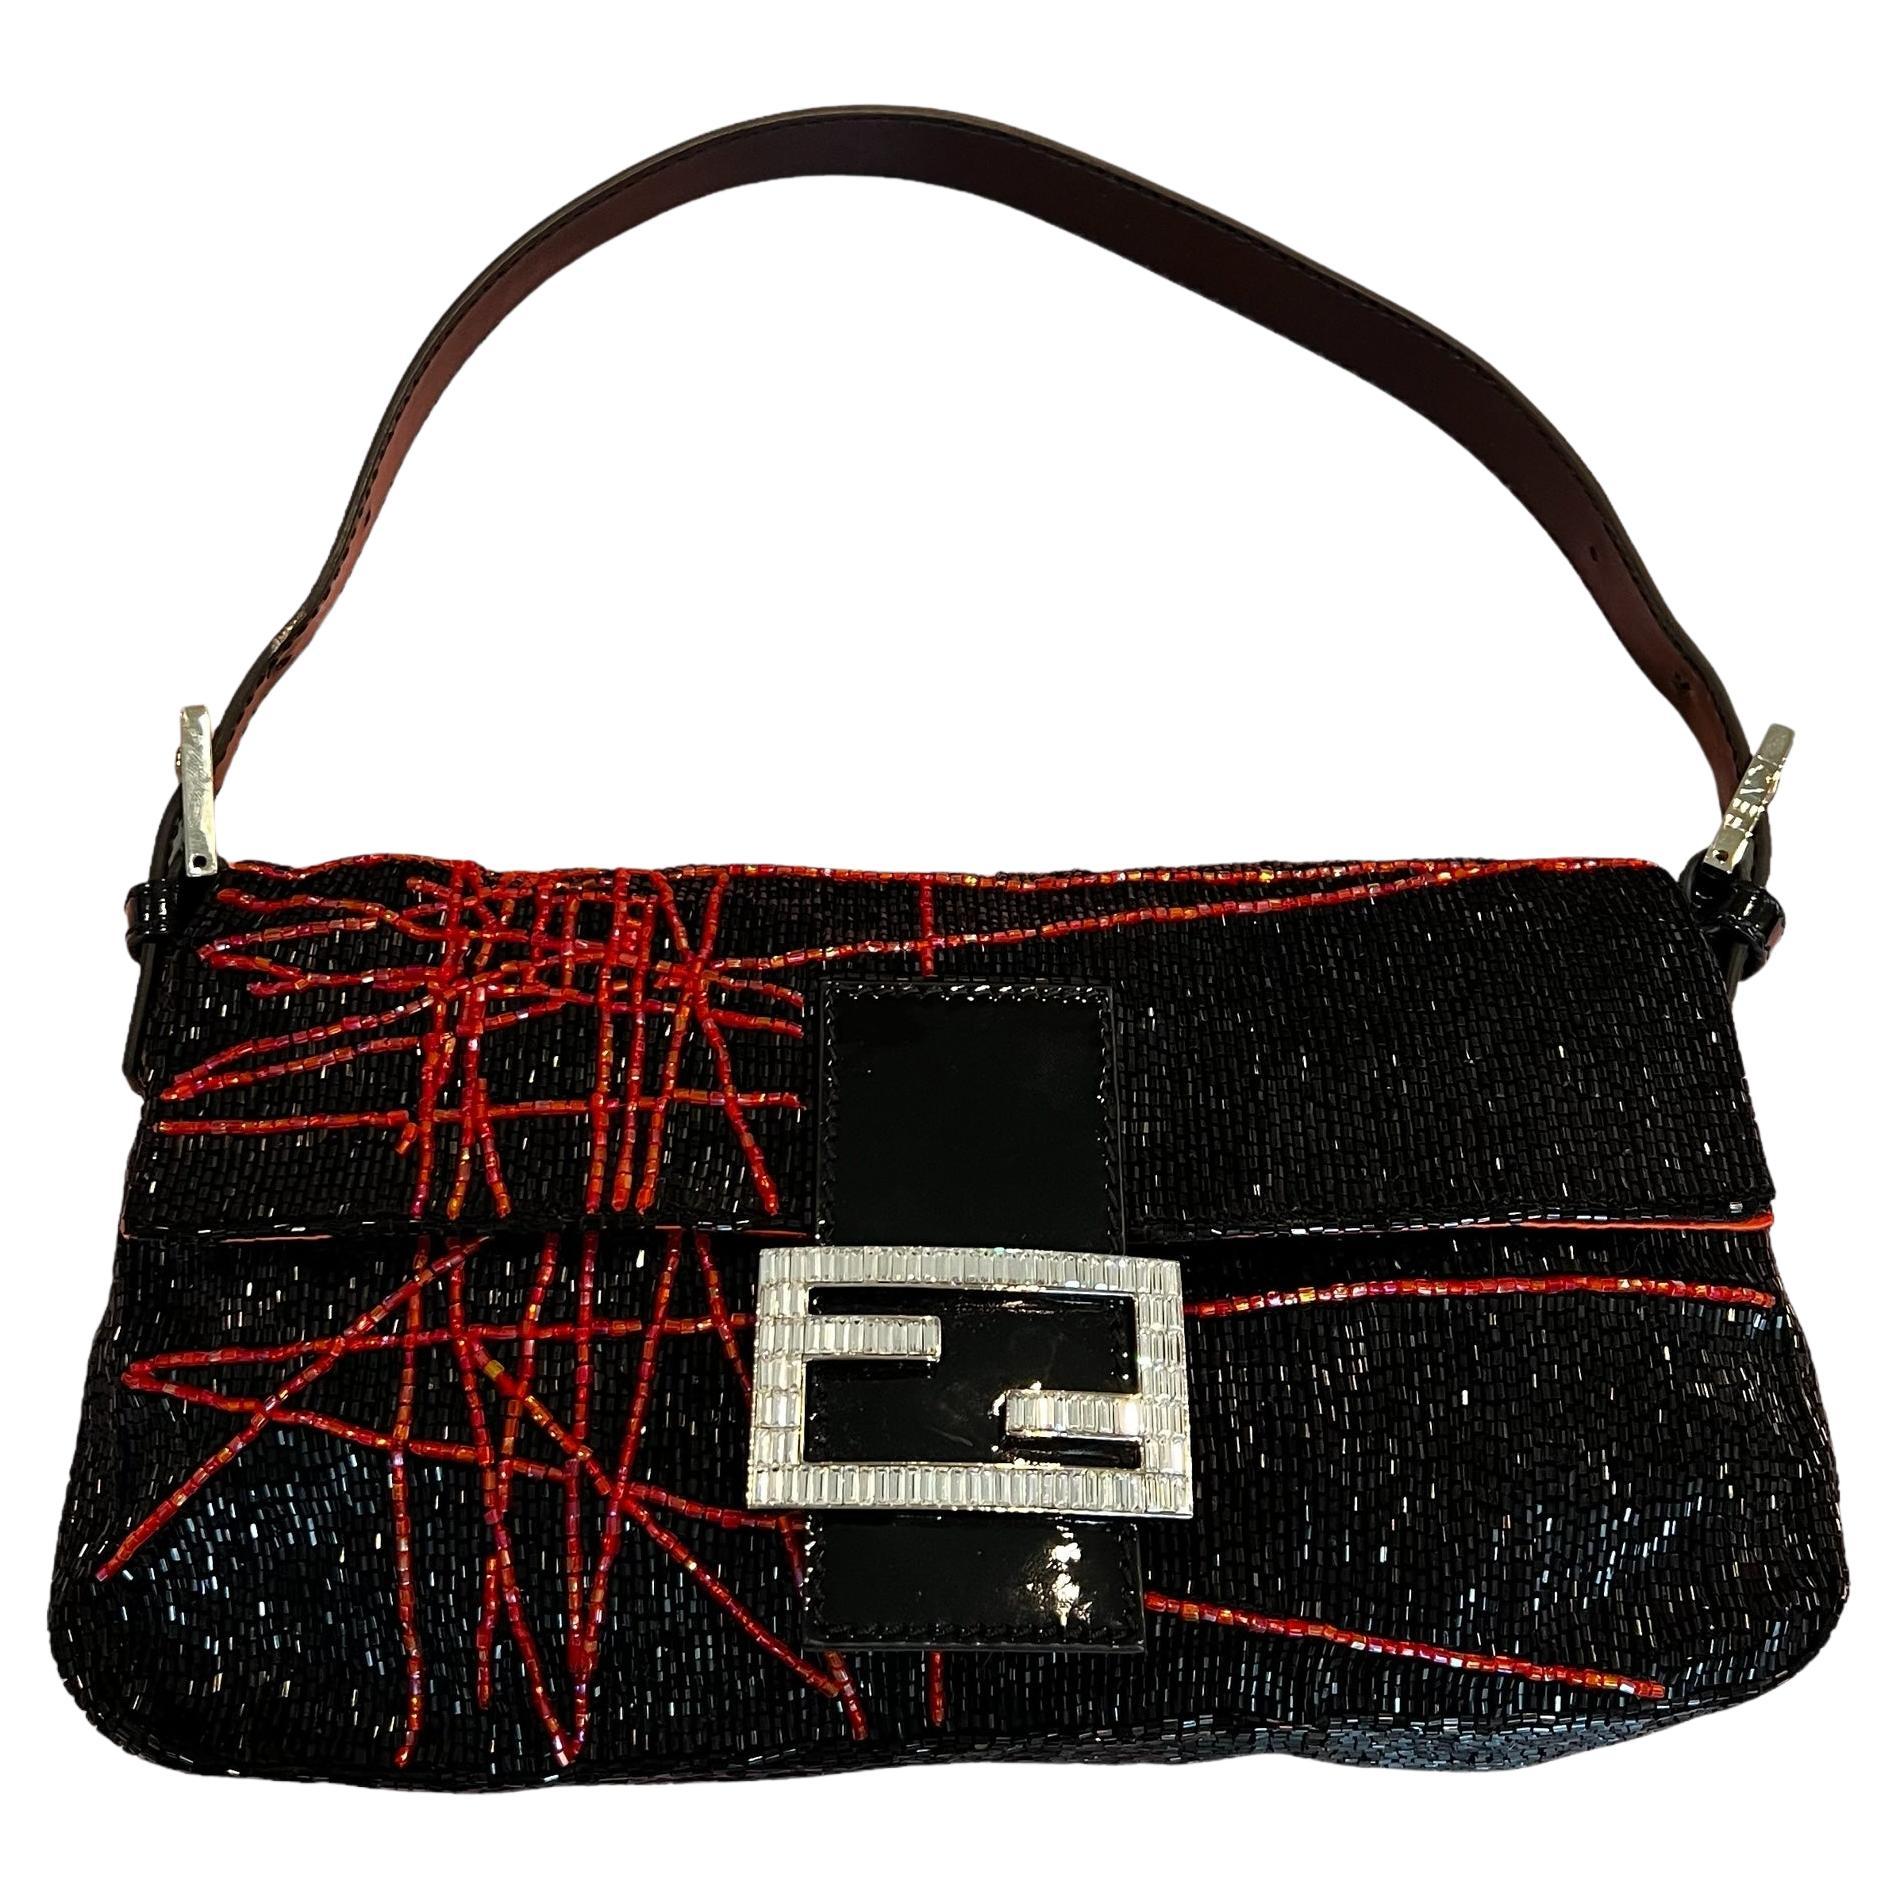 Rare Beaded Fendi Baguette Bag With Patent Leather & Swarovski Crystals For Sale